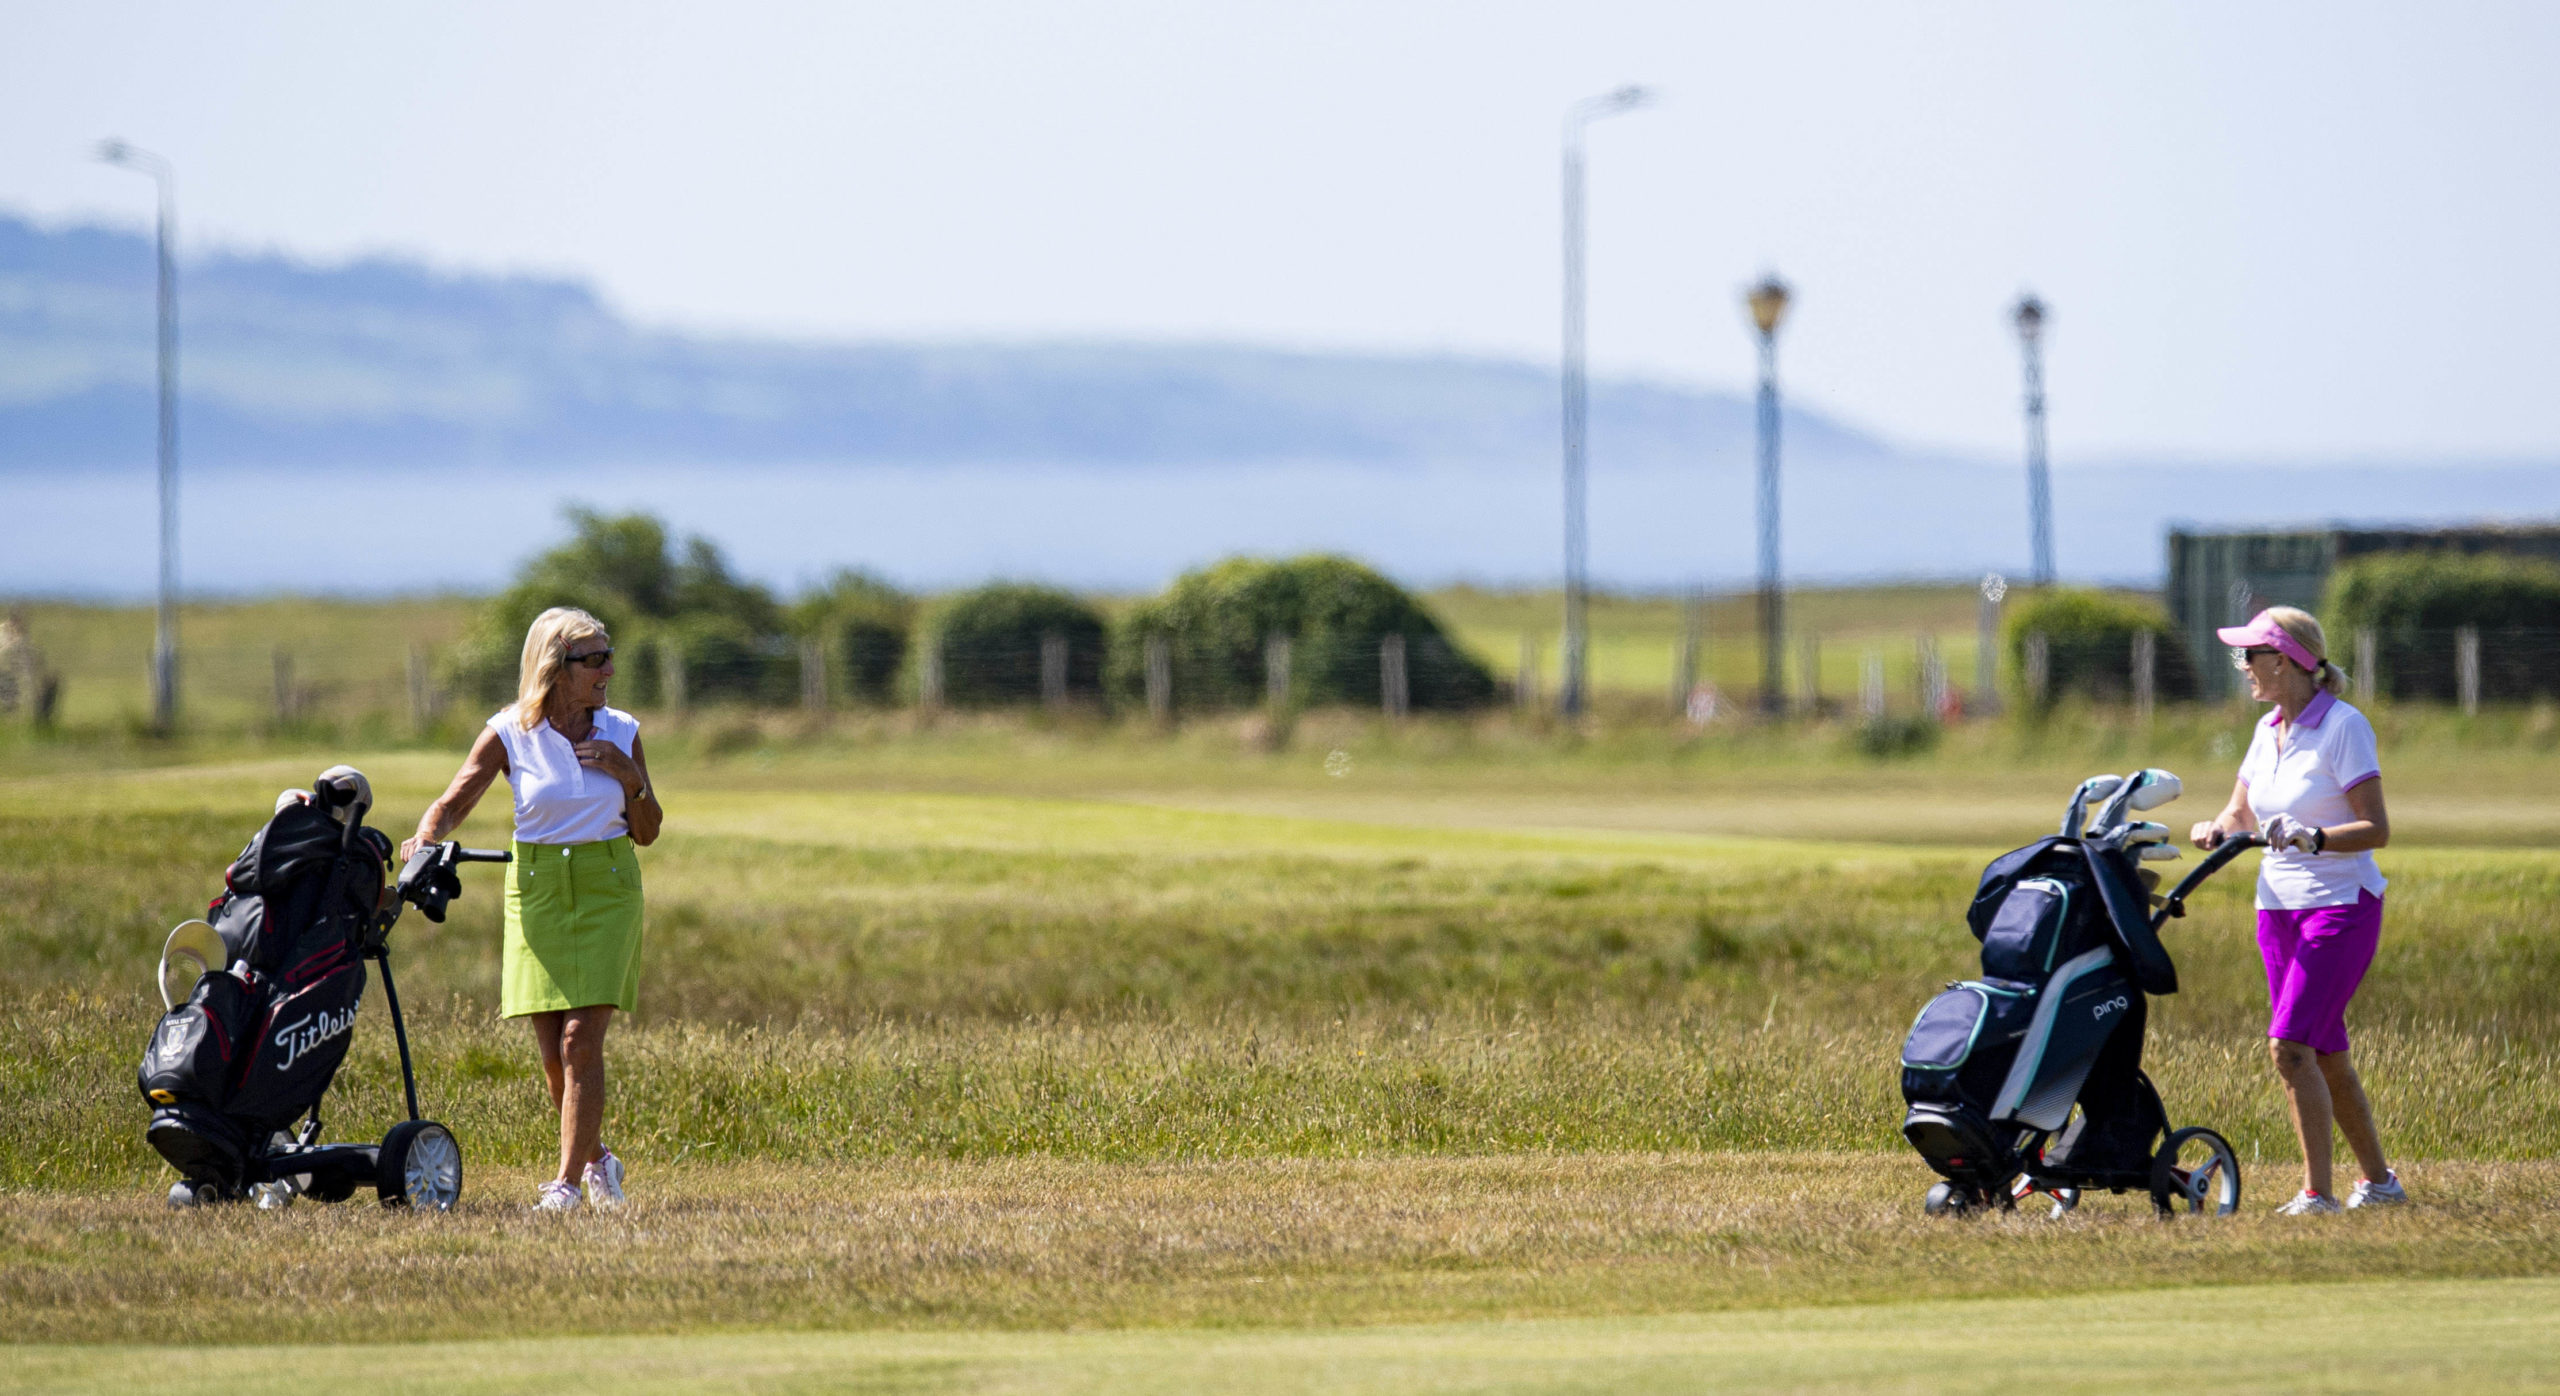 Golfers return to the links at Royal Troon as lockdown restrictions are eased. SNS Group.